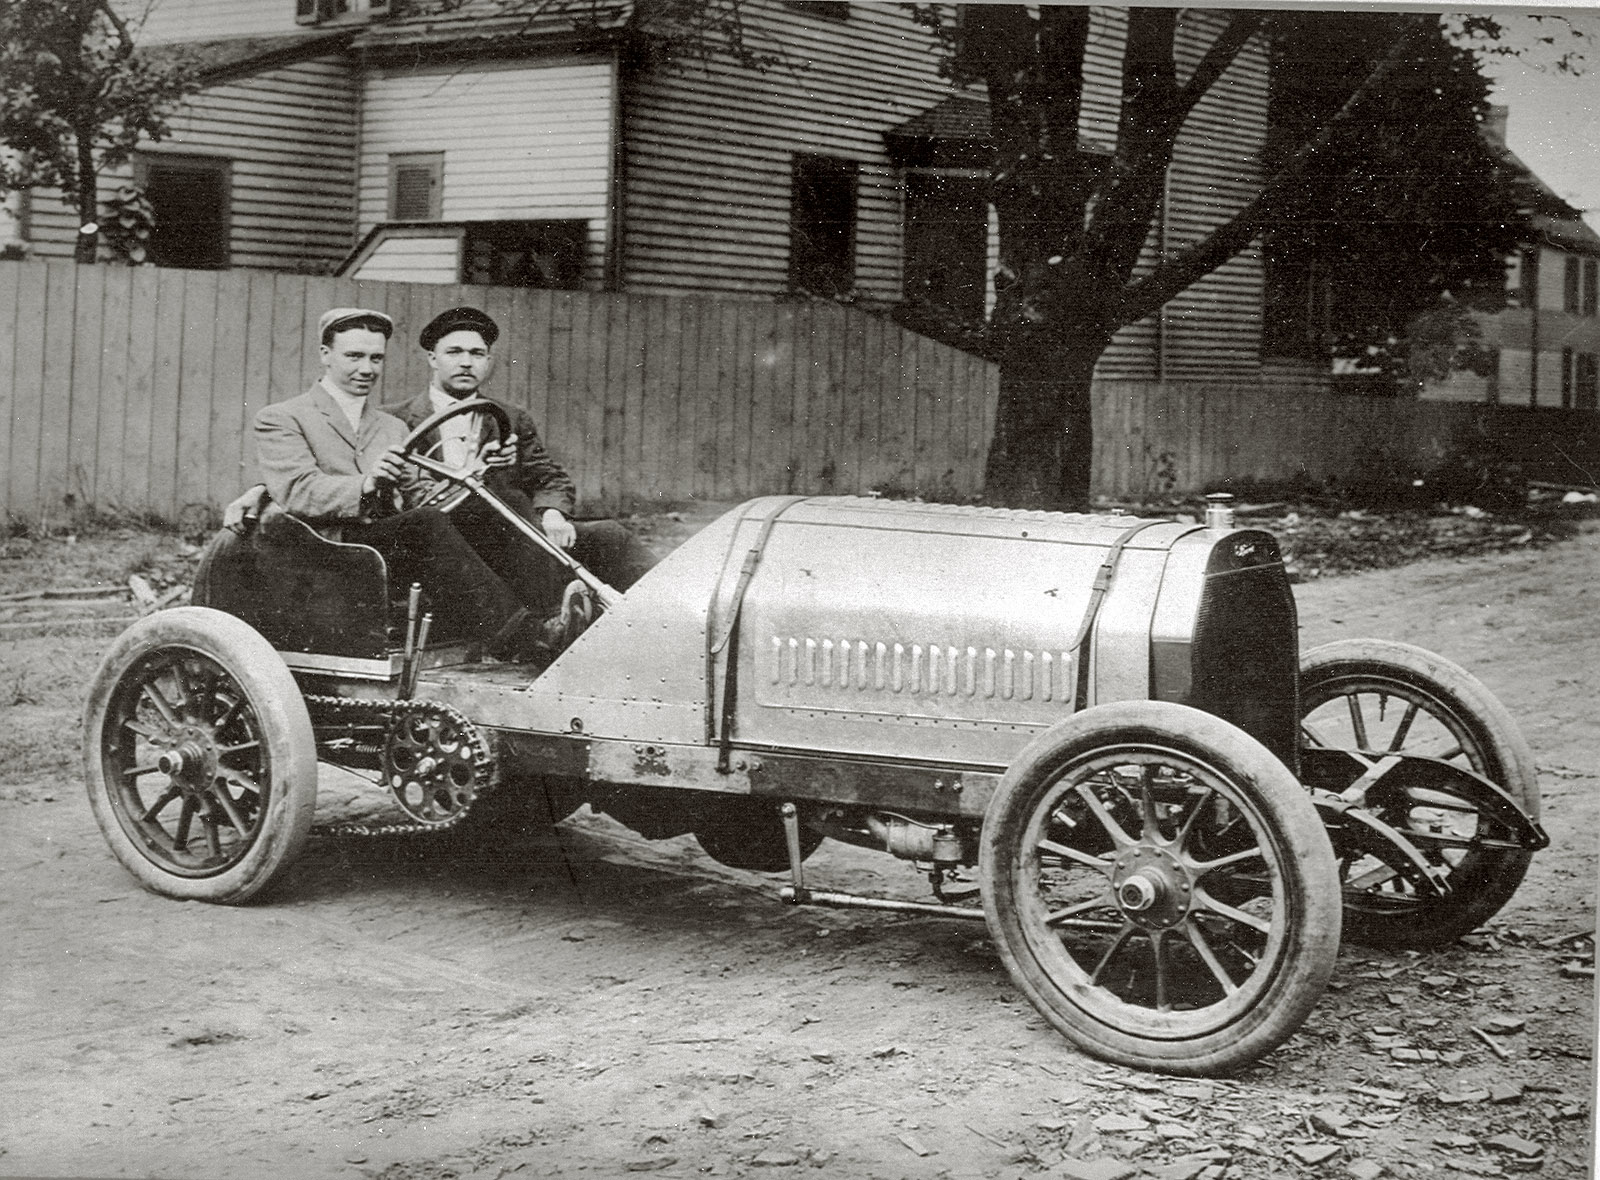 Famous NY-Paris 1908 race driver Montague Roberts (left) with brother Mortimer Roberts, who was a race car driver as well. Here they are in their racecar known as "The Donkey." View full size.